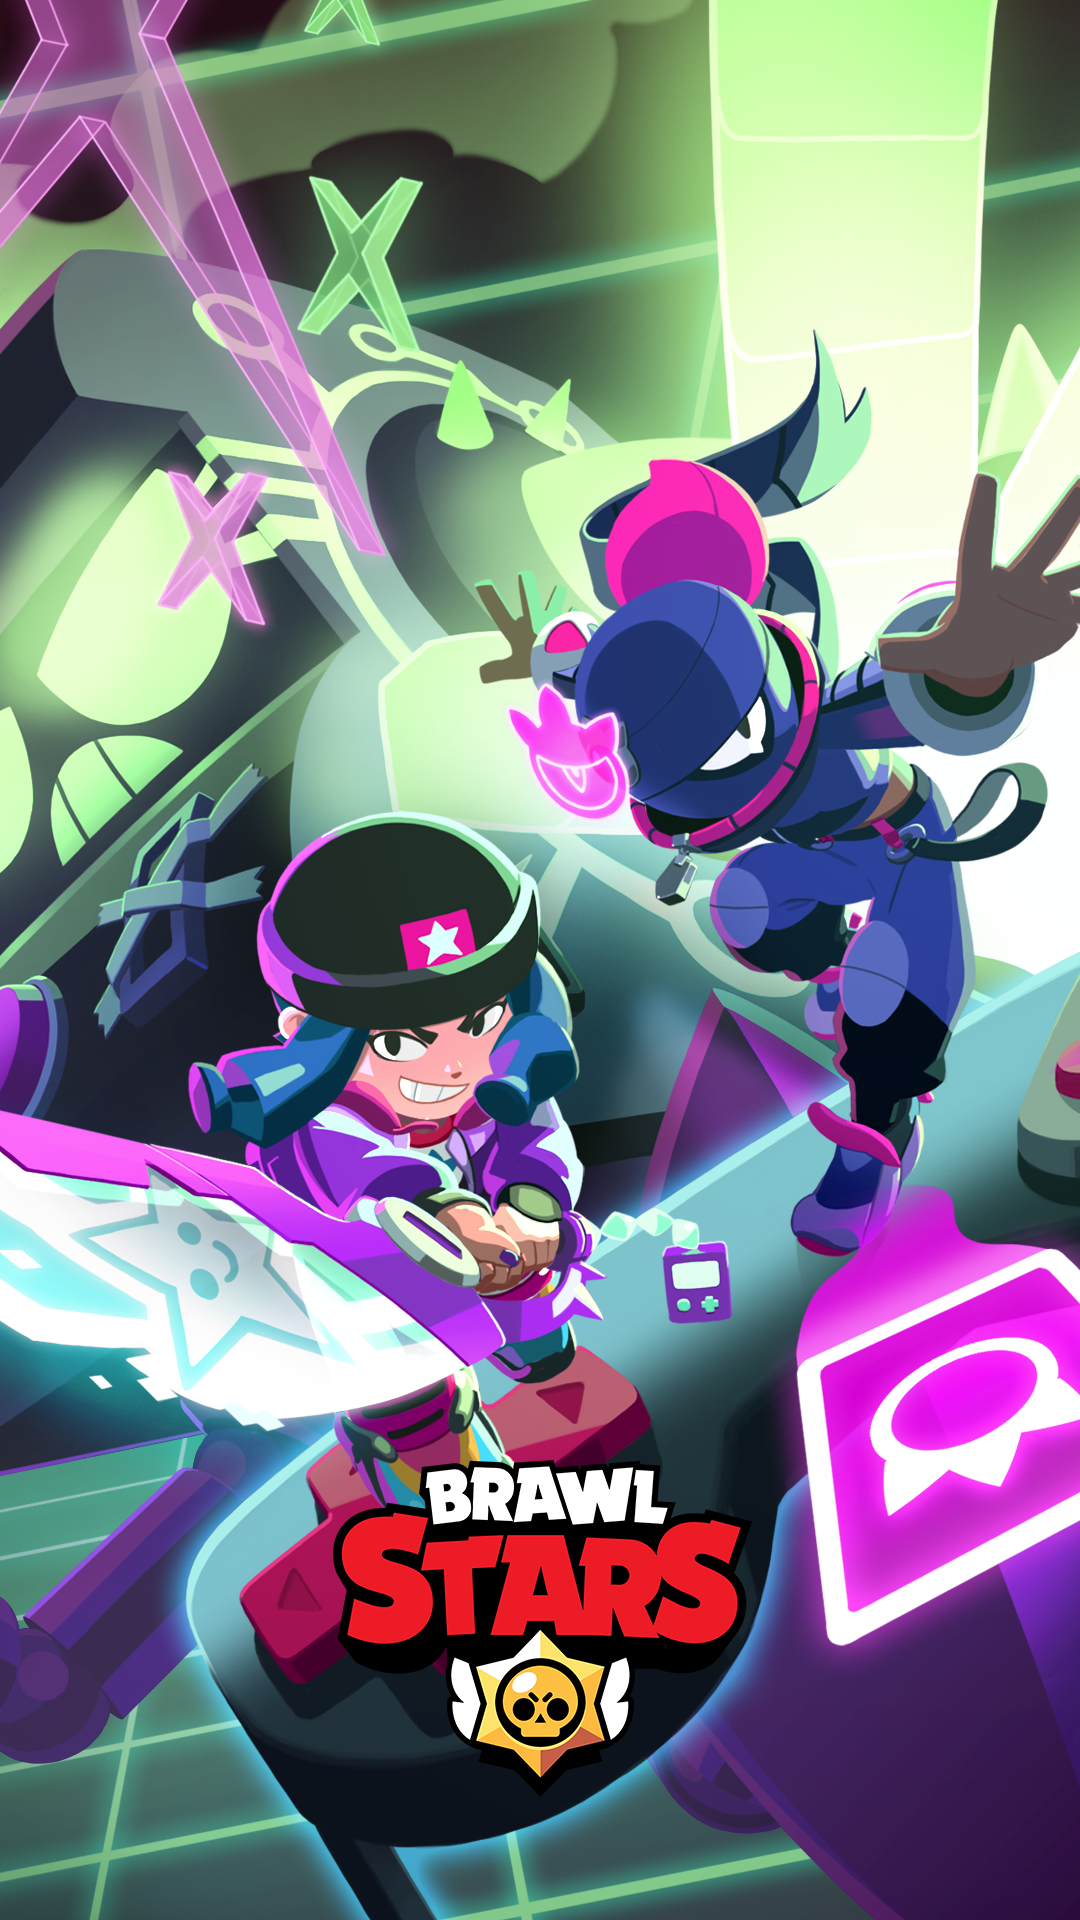 Brawl Stars Realeased A Phone Wallpaper With The Theme Of New